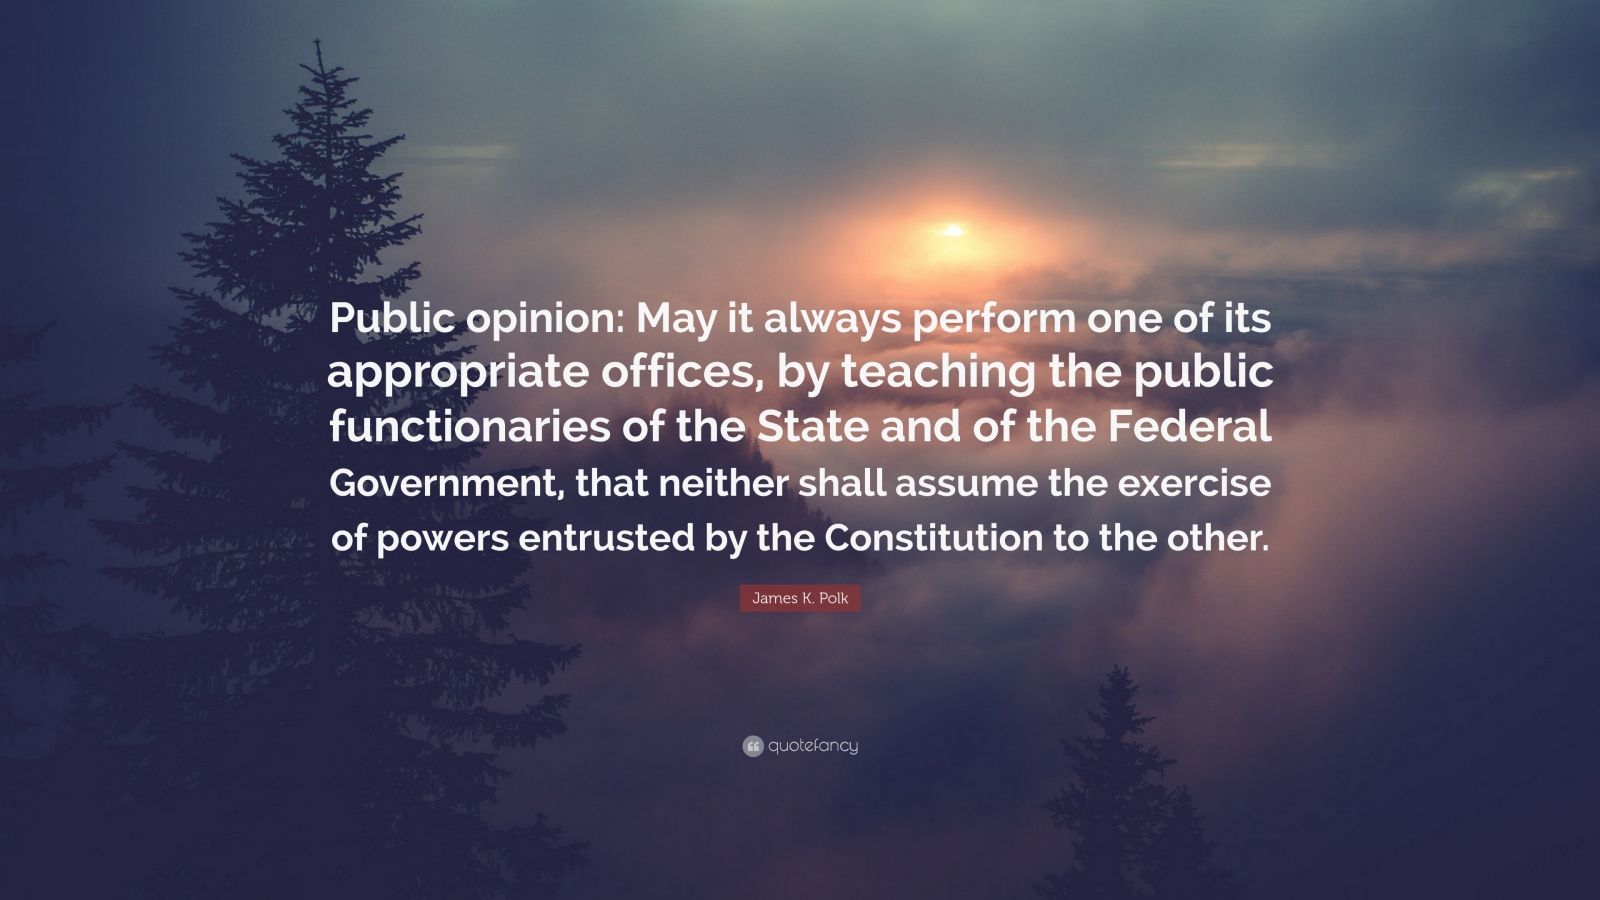 James K. Polk Quote: "Public opinion: May it always ...